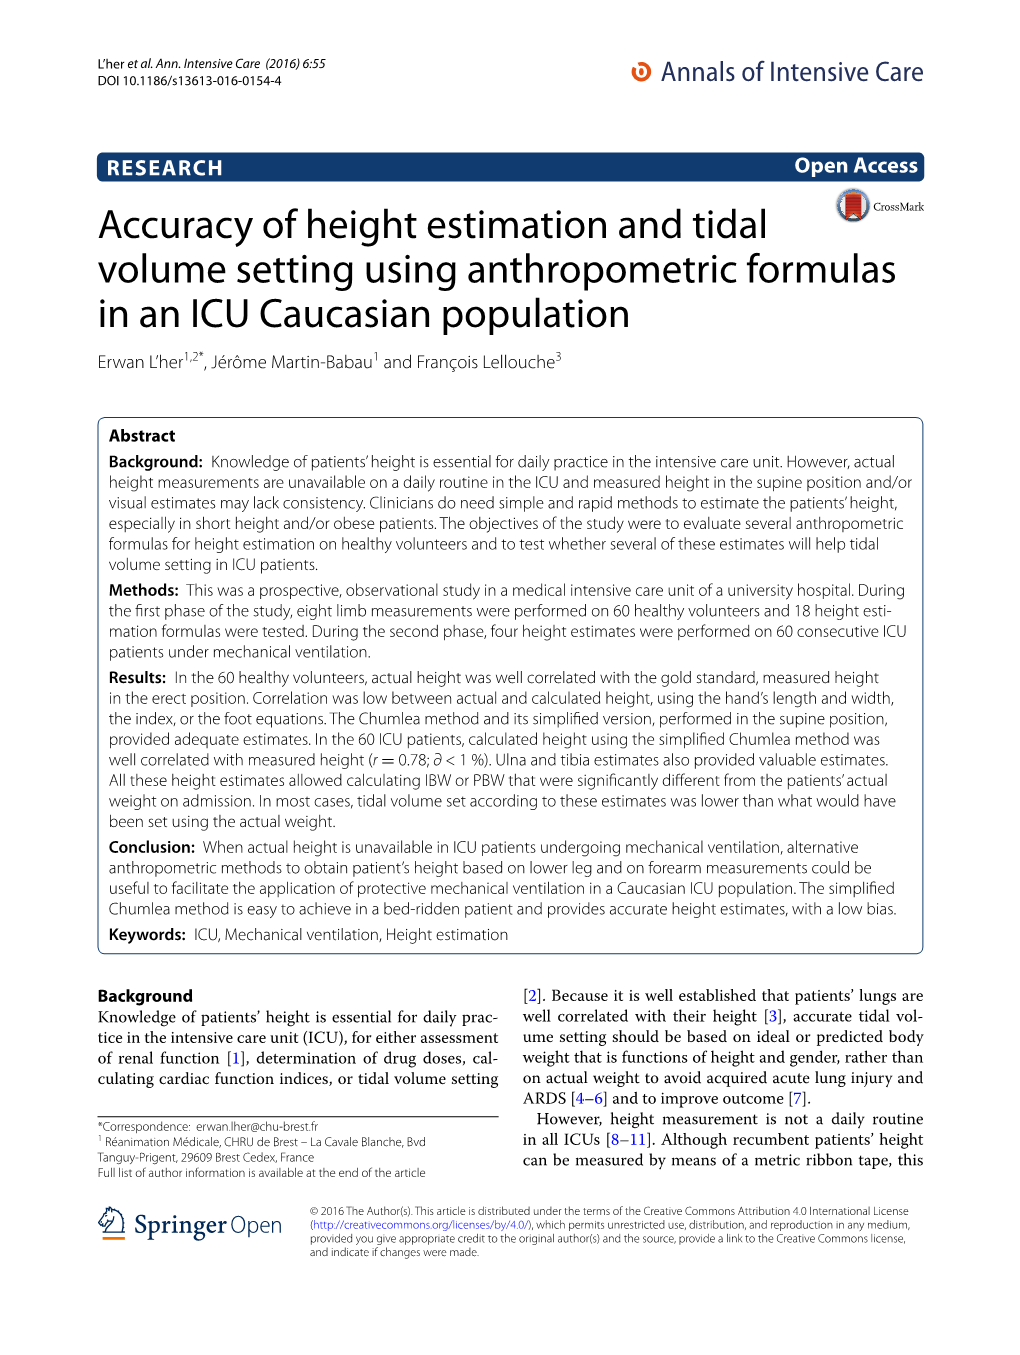 Accuracy of Height Estimation and Tidal Volume Setting Using